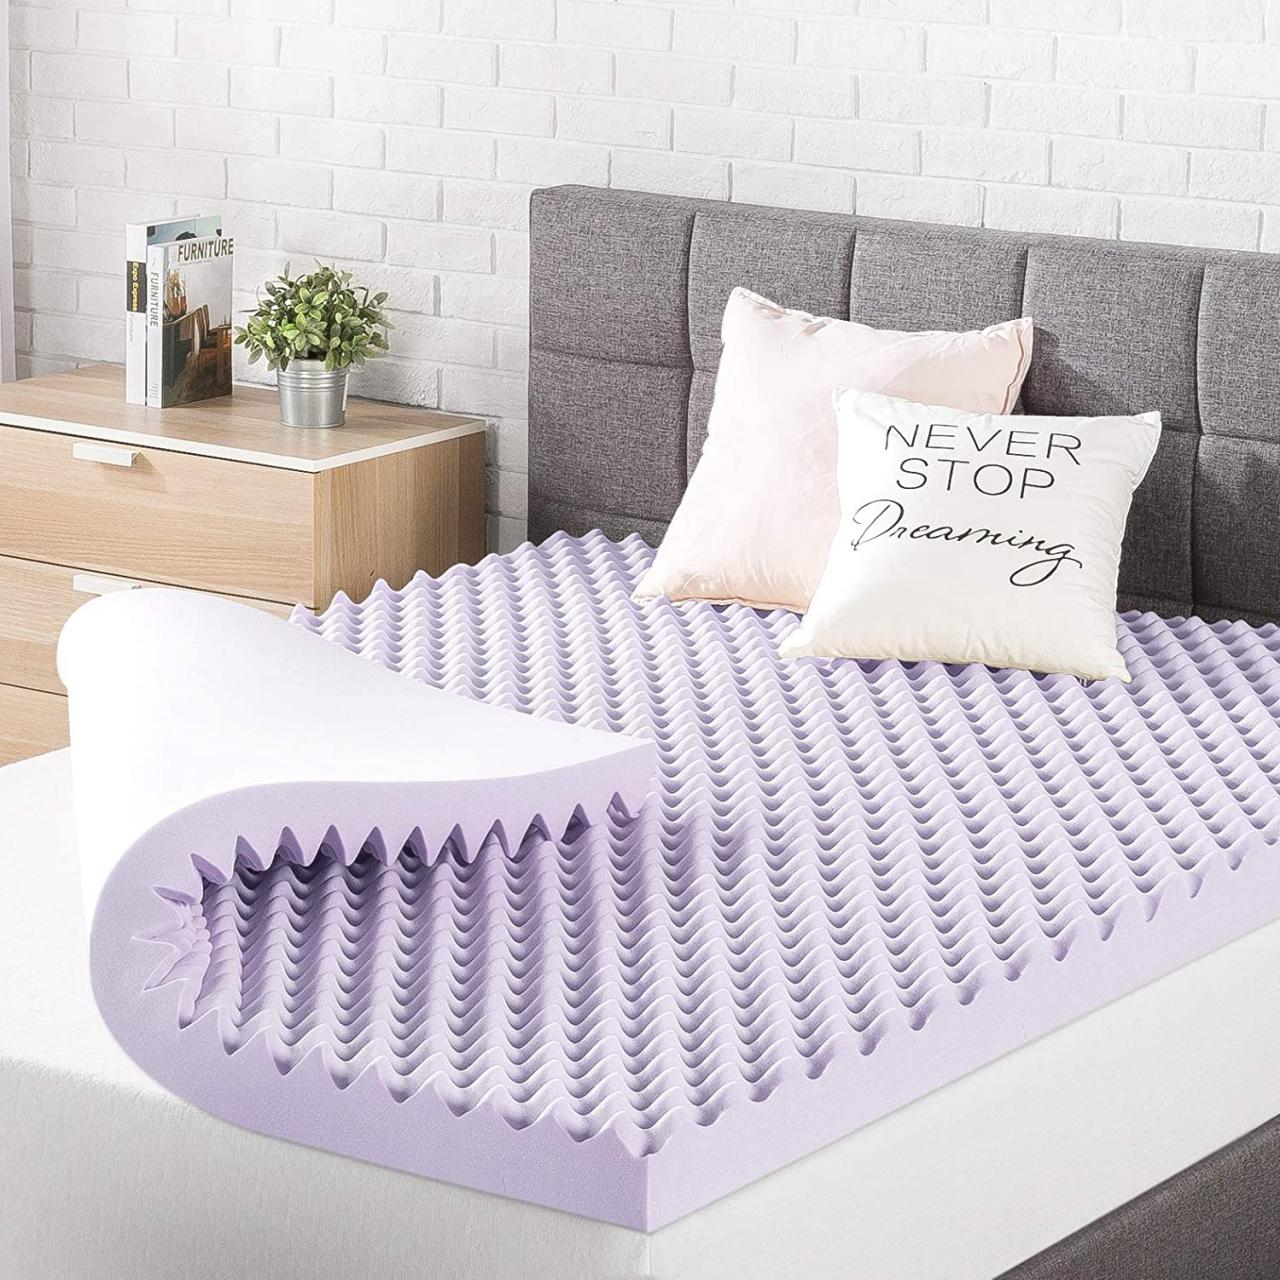 Buy Best Price Mattress 3 Inch Egg Crate Memory Foam Mattress Topper with  Soothing Lavender Infusion, CertiPUR-US Certified, Twin Online in UK.  B07BNYQ8PS